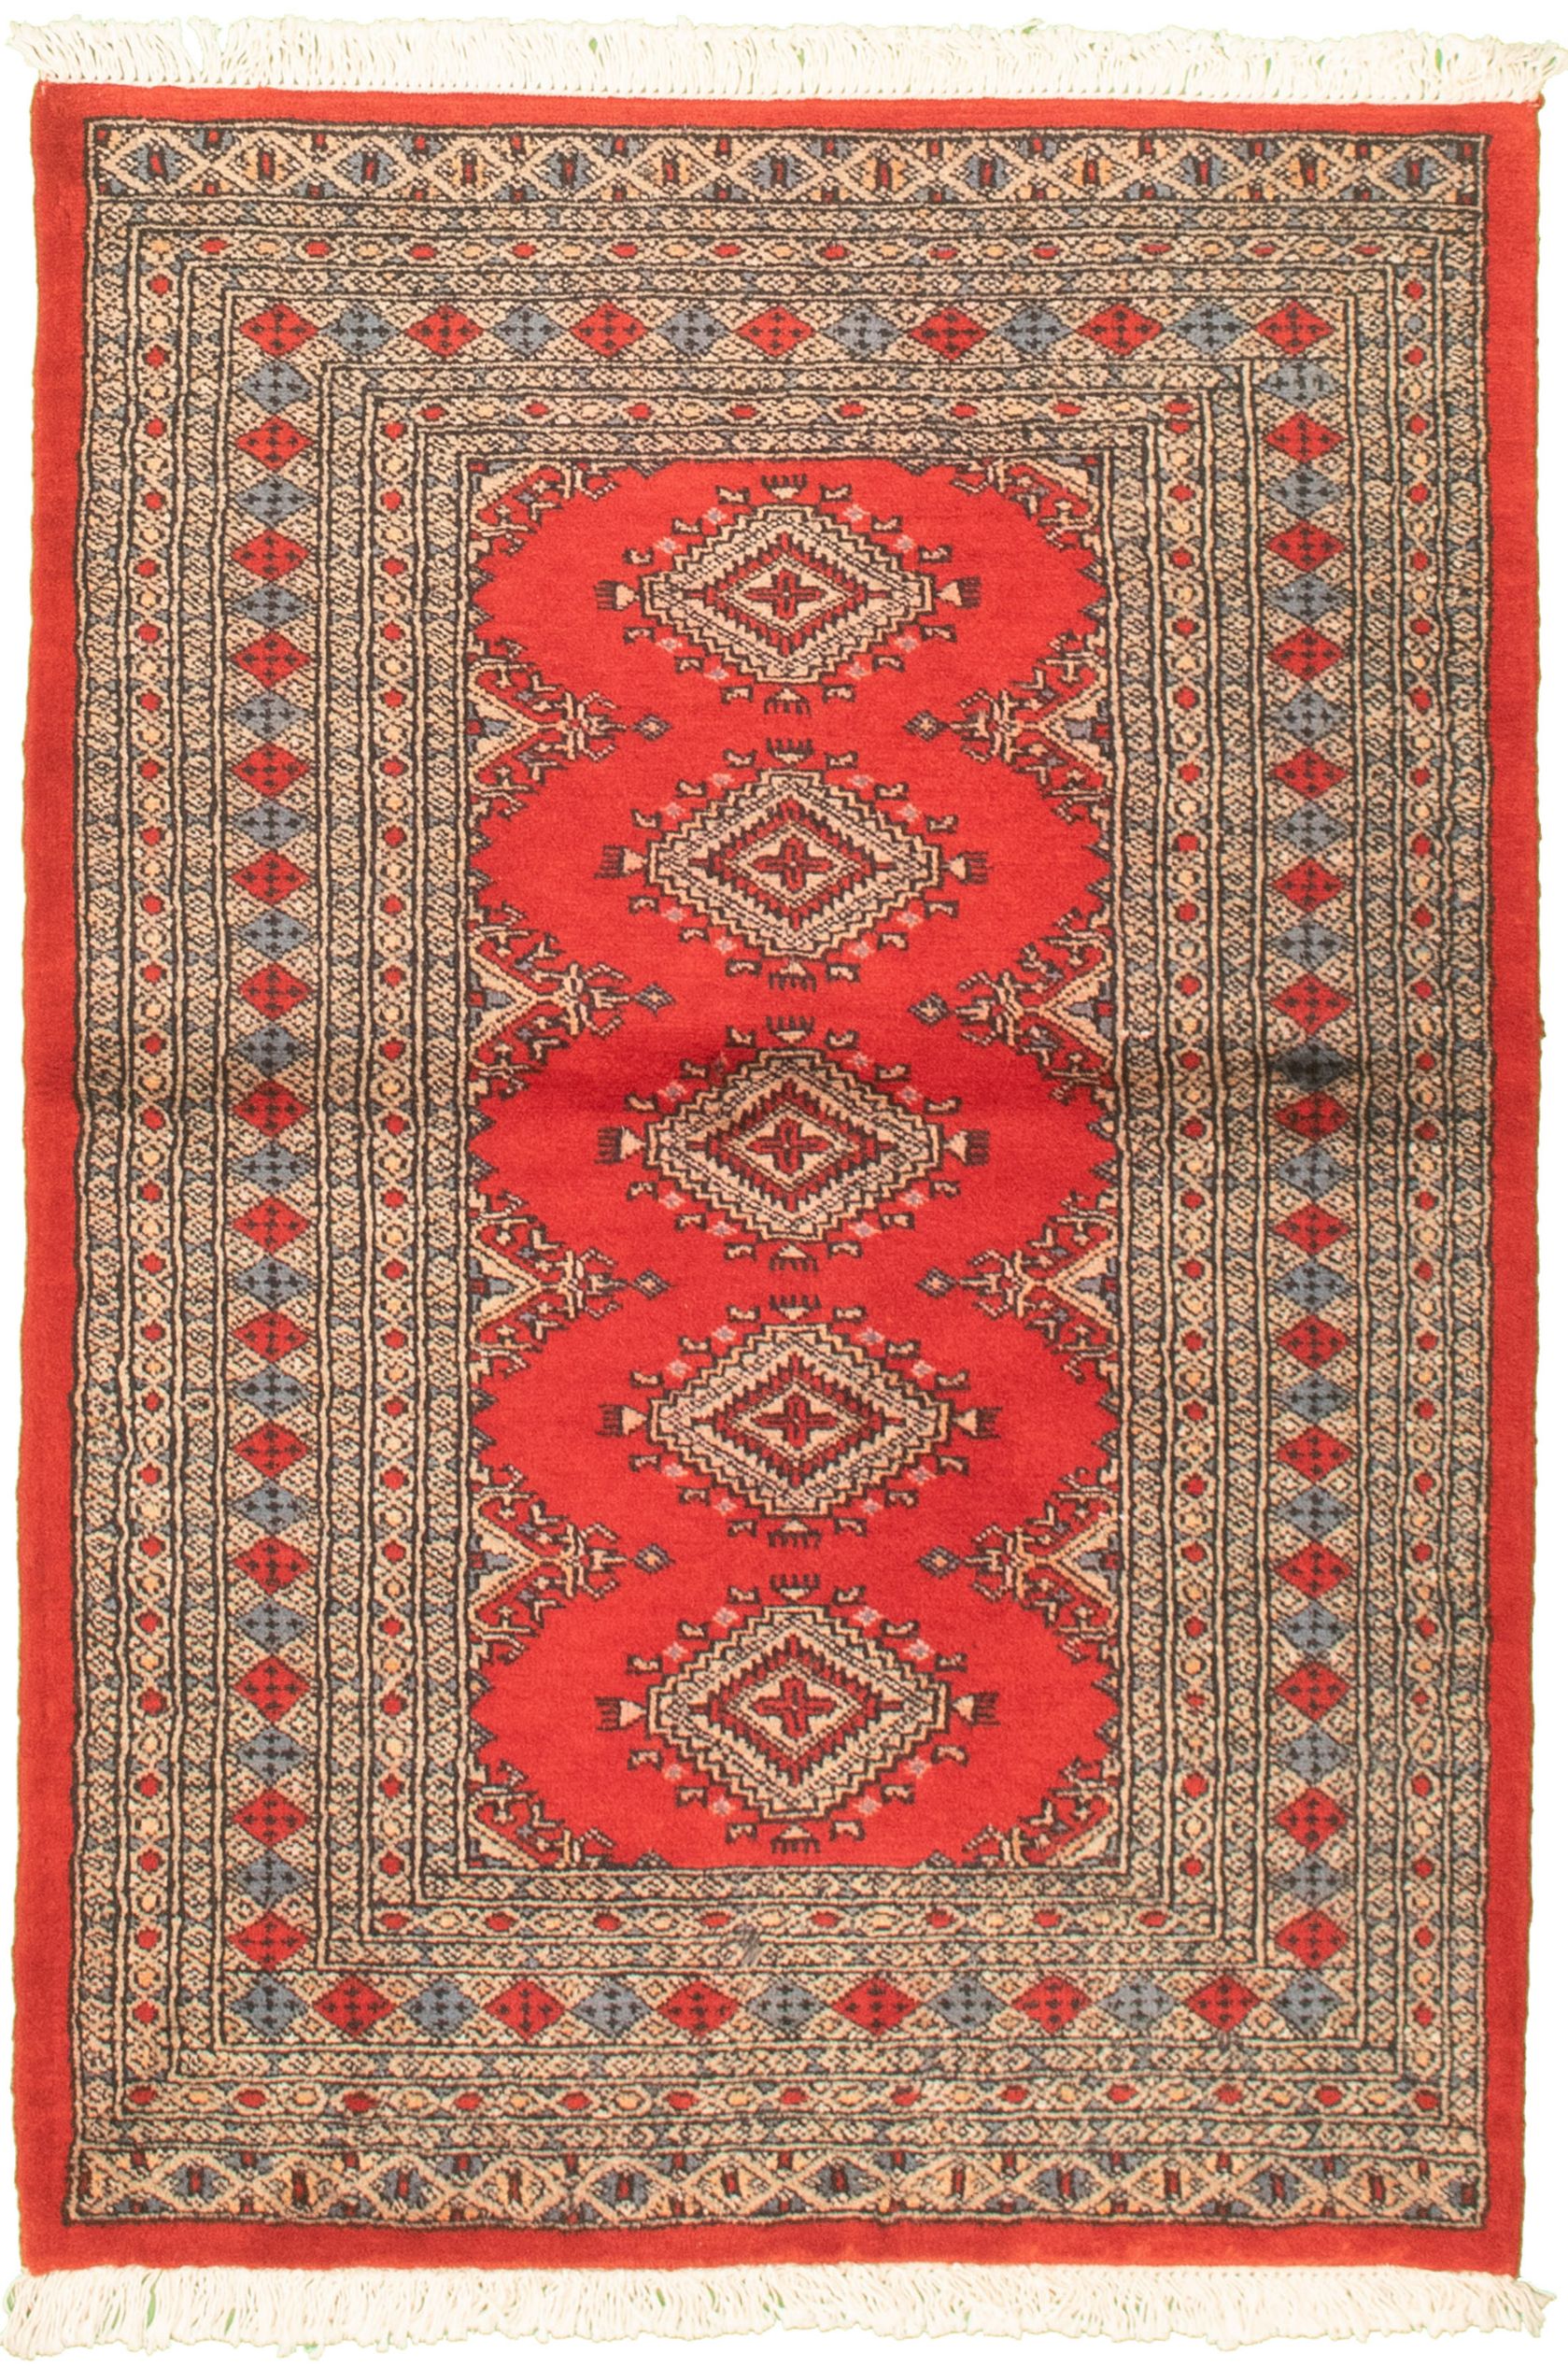 Hand-knotted Finest Peshawar Bokhara Red Wool Rug 3'2" x 4'11"  Size: 3'2" x 4'11"  